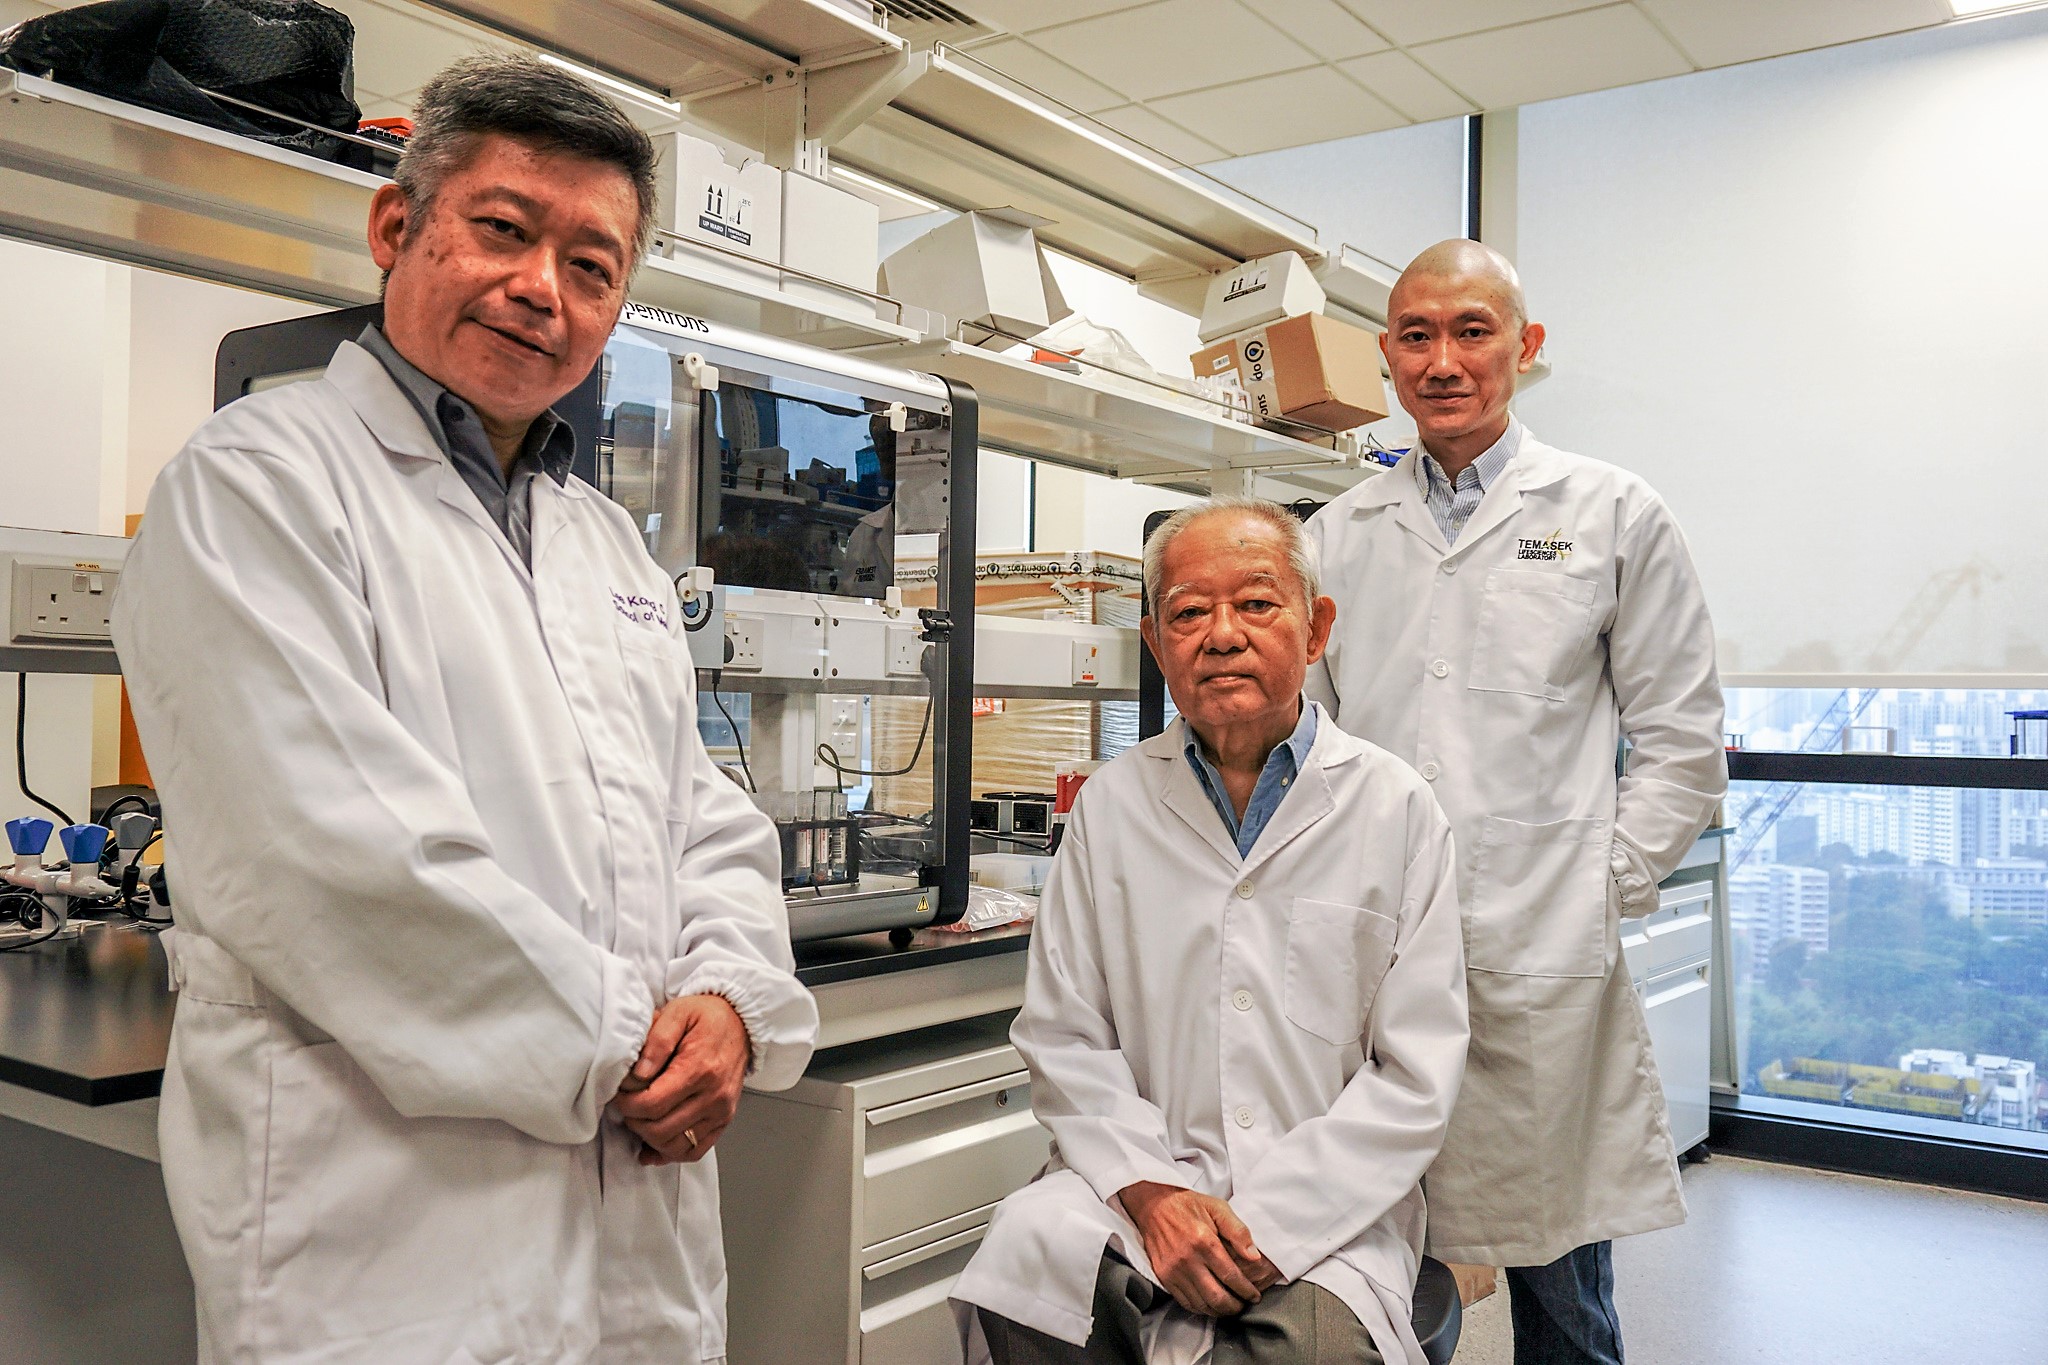 Assoc Prof Eric Yap from LKCMedicine, who is the Medical Director of the new lab, with co-founders of Pathnova Laboratories, Emeritus Professor Chan Soh Ha and Dr Ian Cheong